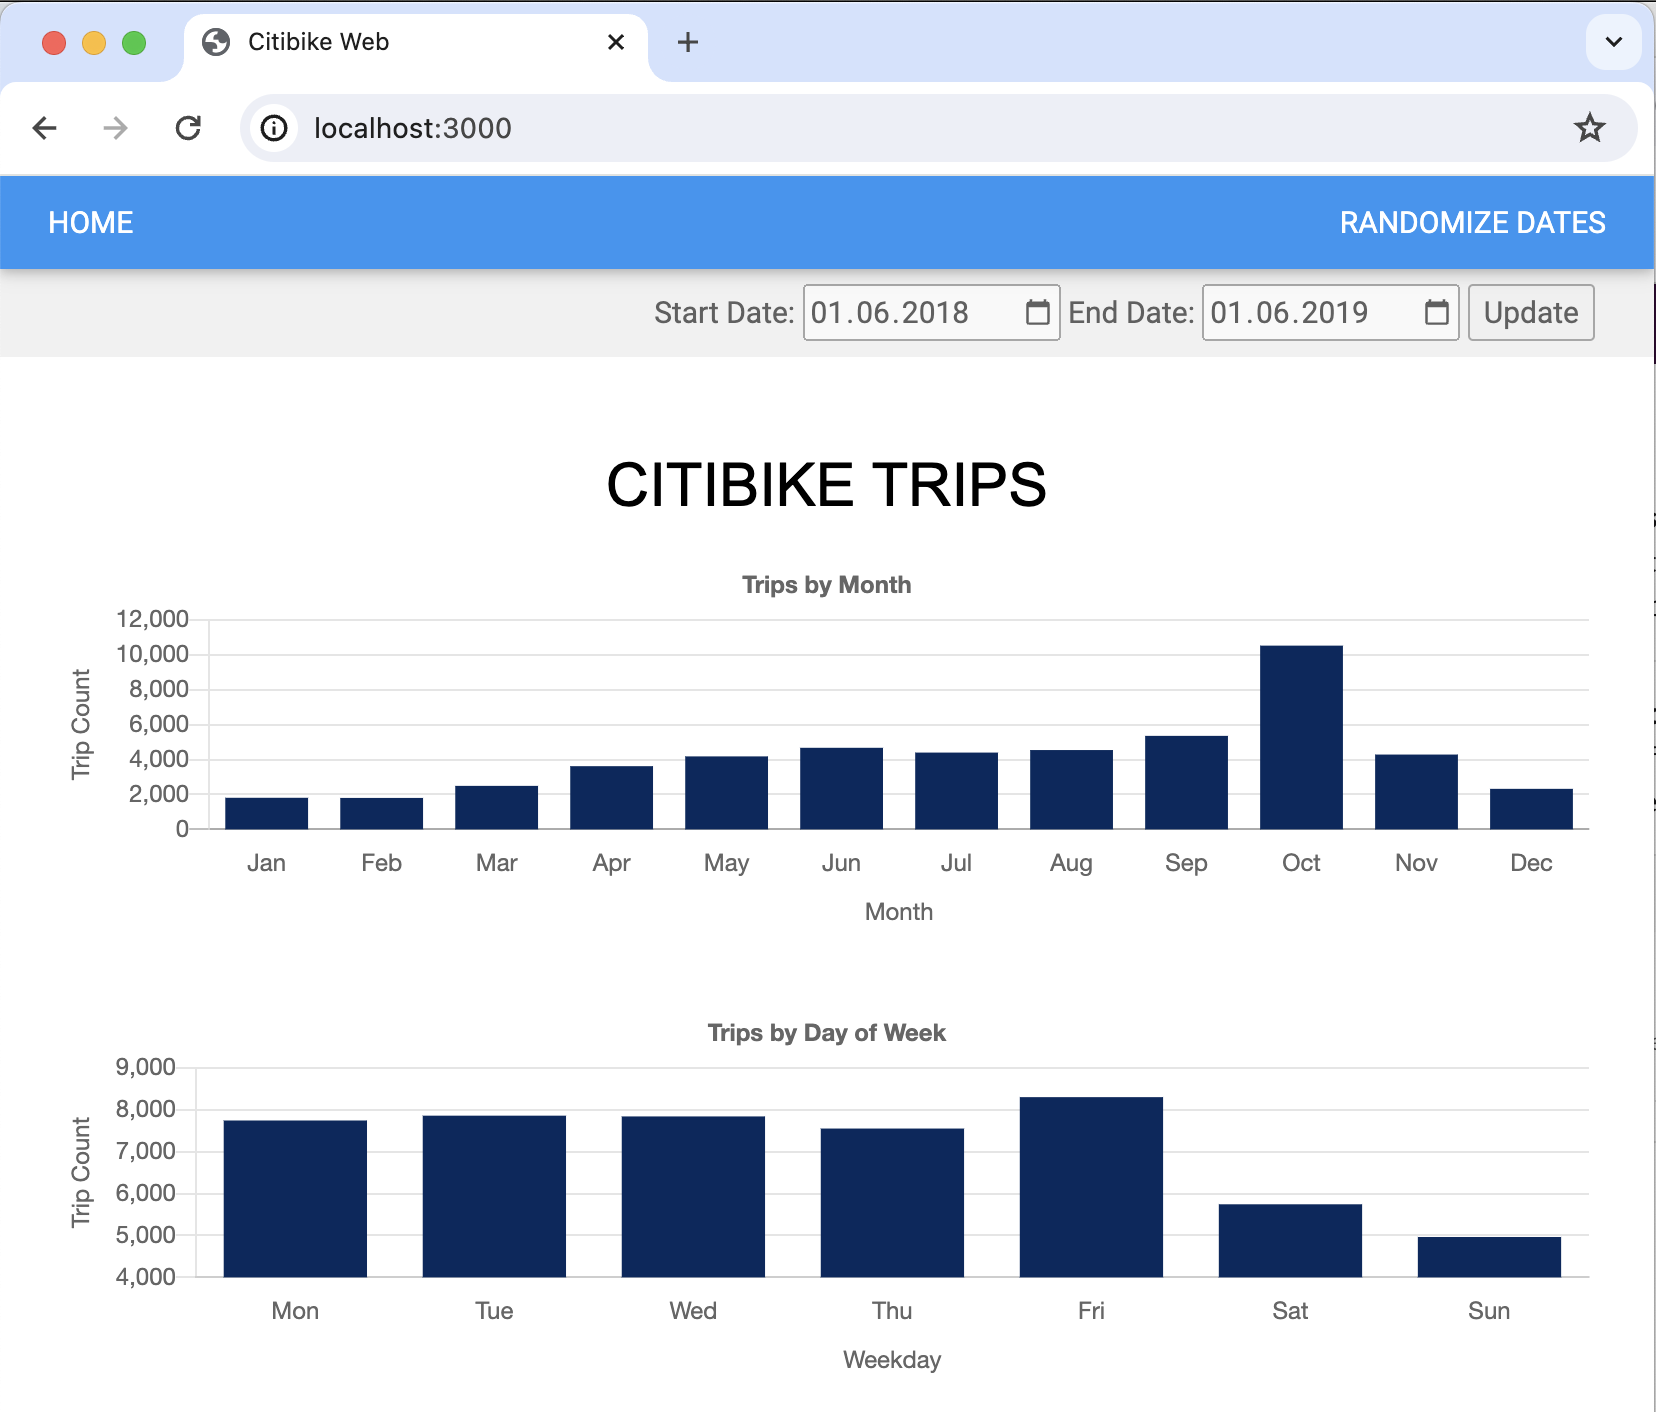 Web app querying NYC Citibike trips data and displaying the distribution of trips by month and weekday